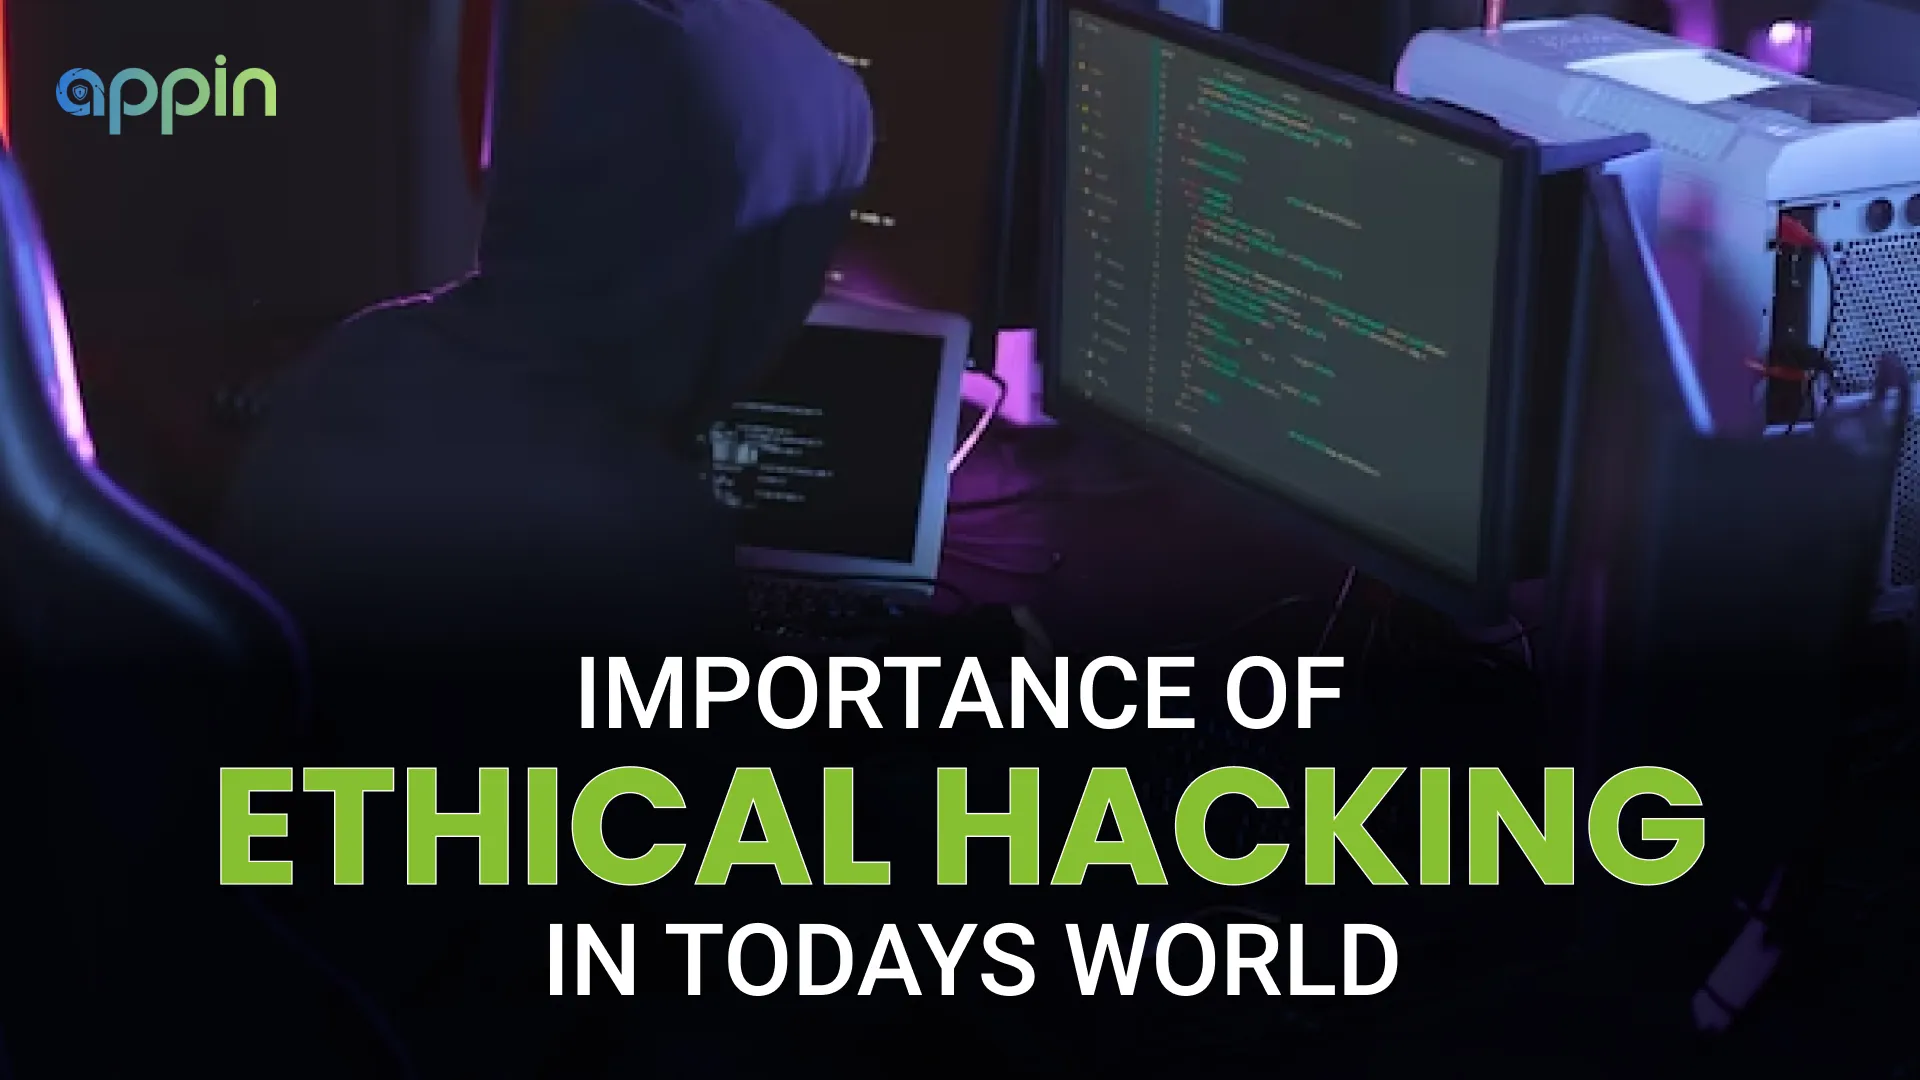 Importance of ethical hacking in todays world